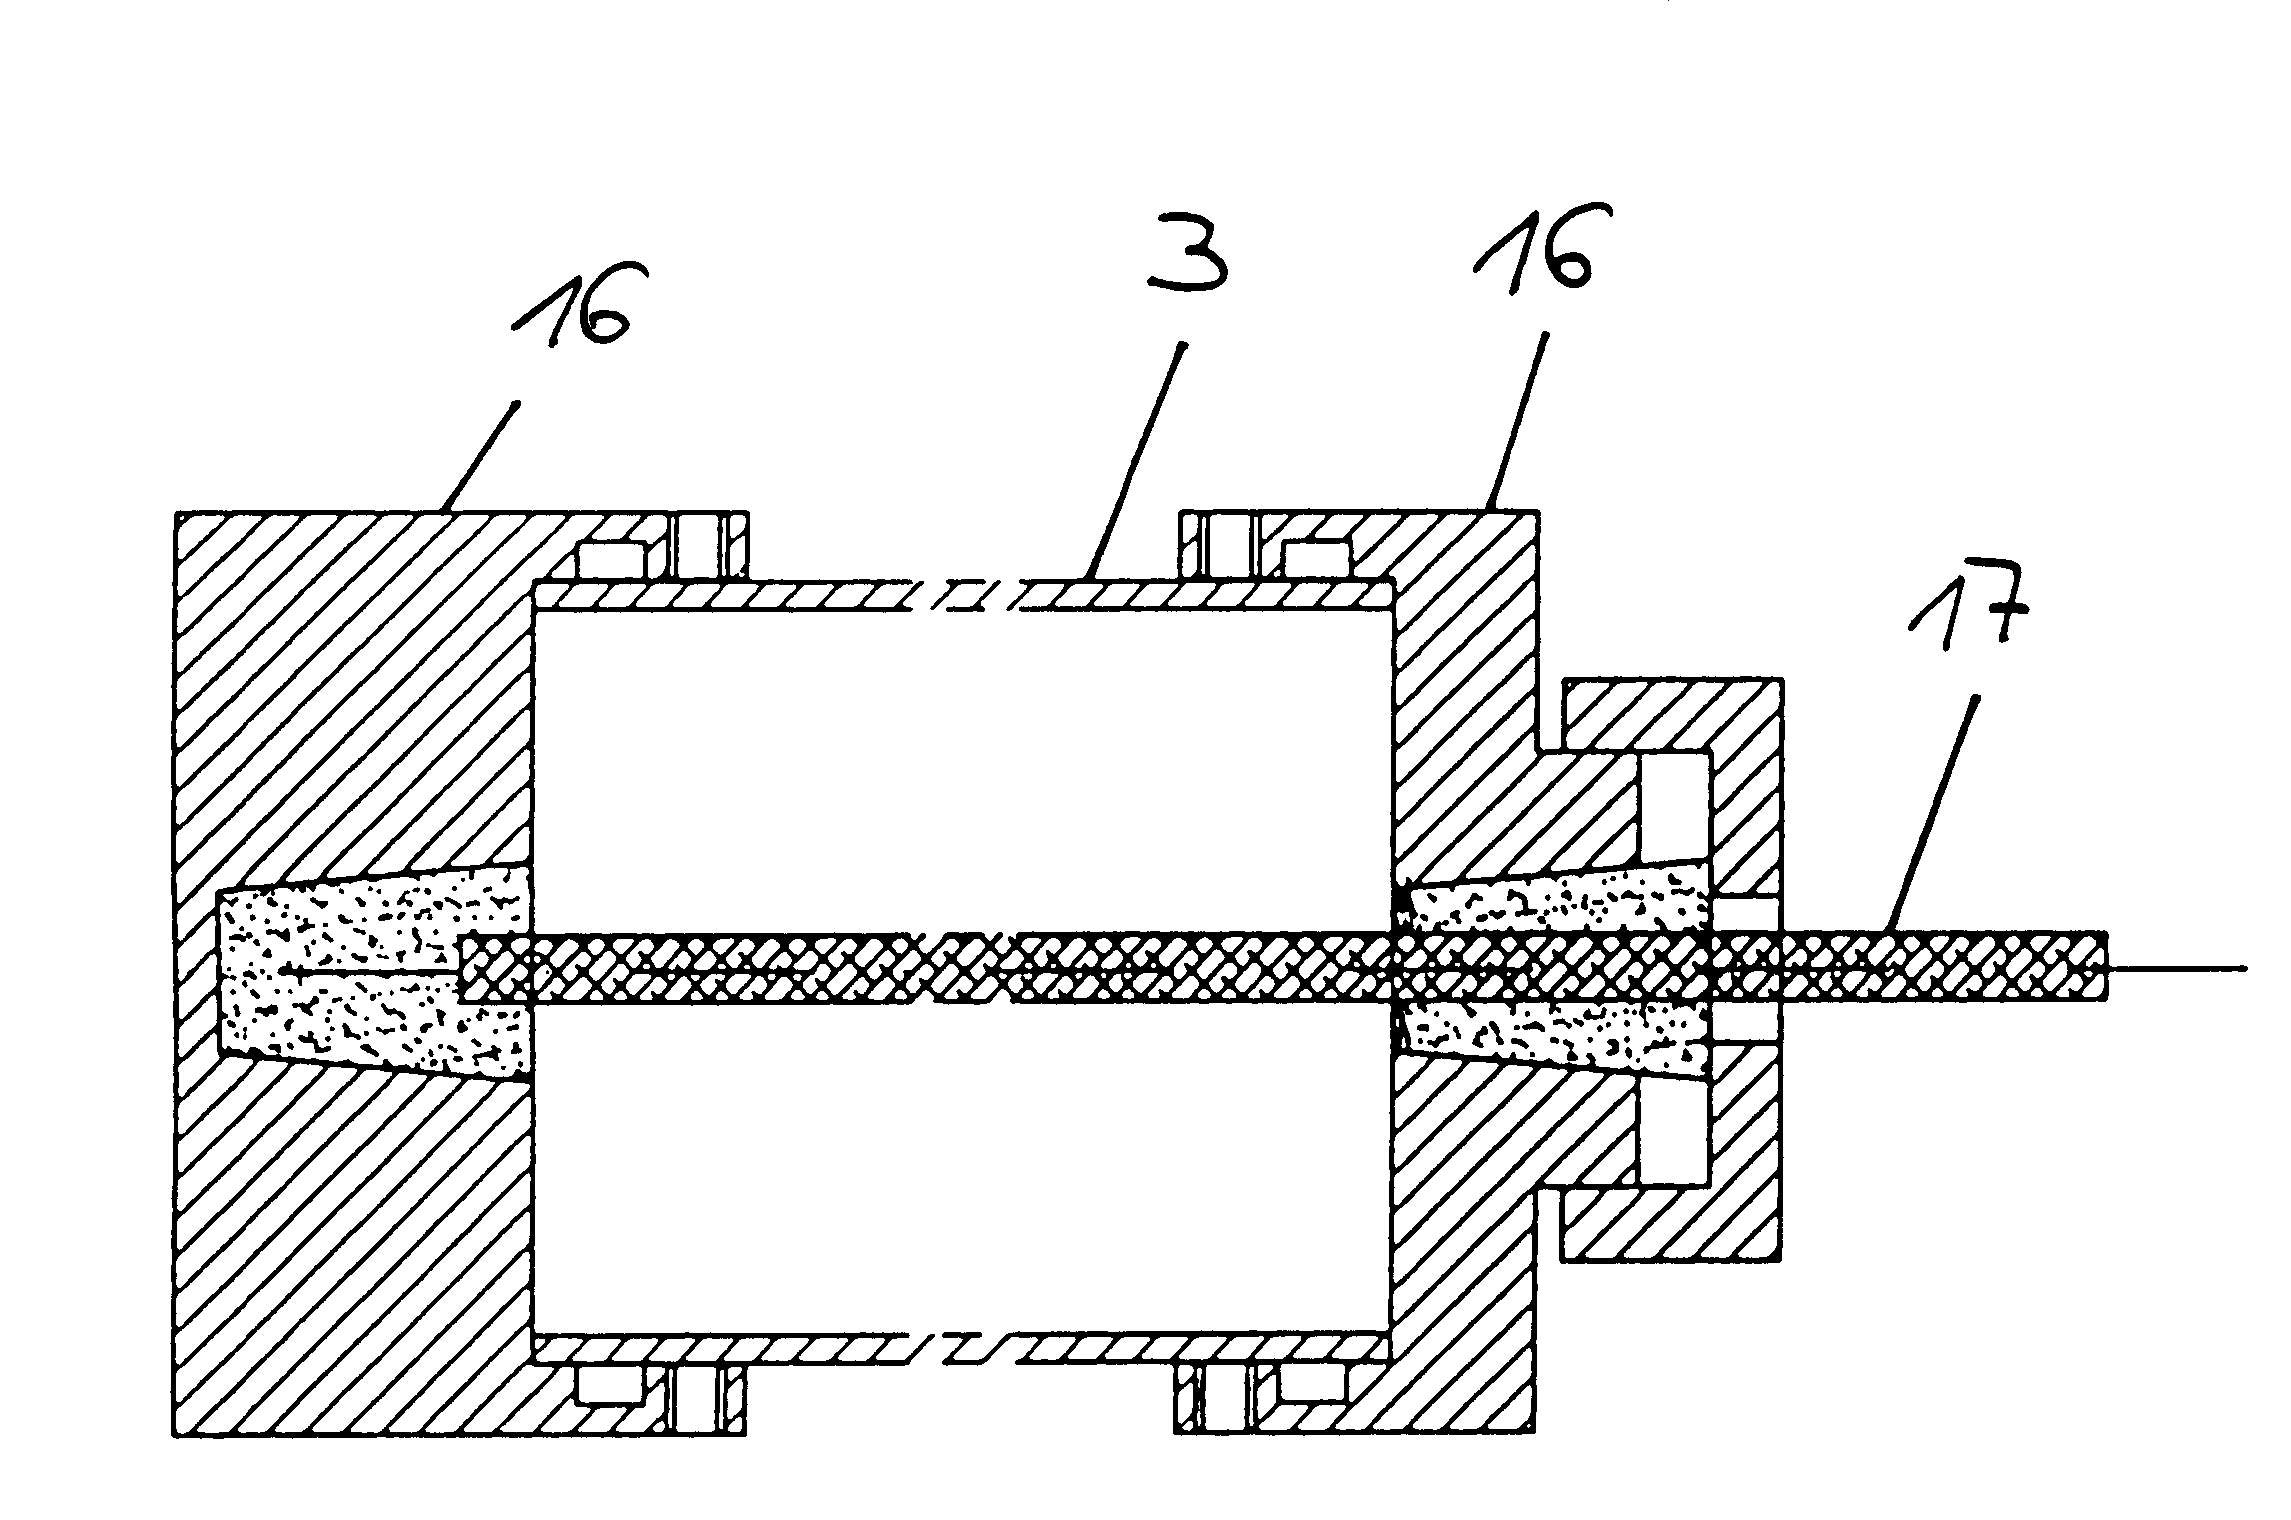 Process and device for determining the surface friction coefficients of bodies